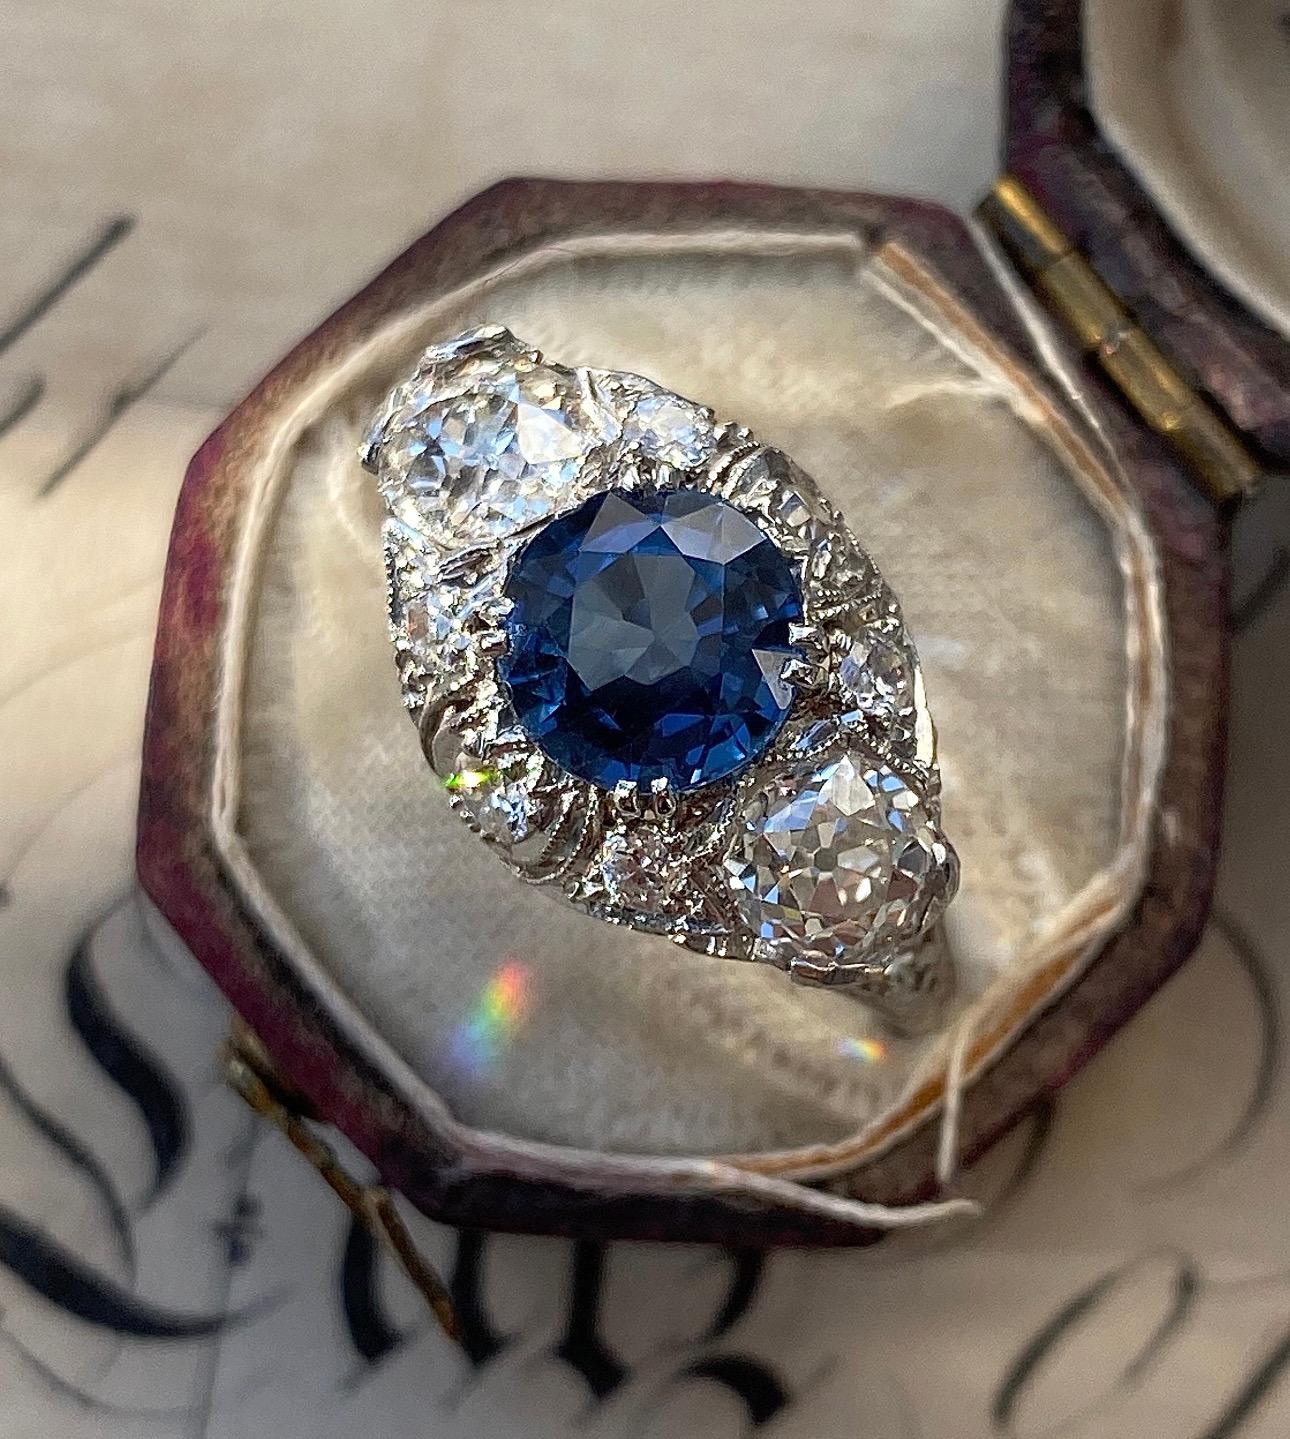 This early 20th century Edwardian/Art Deco ring shimmers from all angles. Hand fabricated in platinum, this lacy diamond setting boasts a 1.64 carat natural, cornflower blue sapphire seated between two sparkling old cut diamonds, skillfully hand